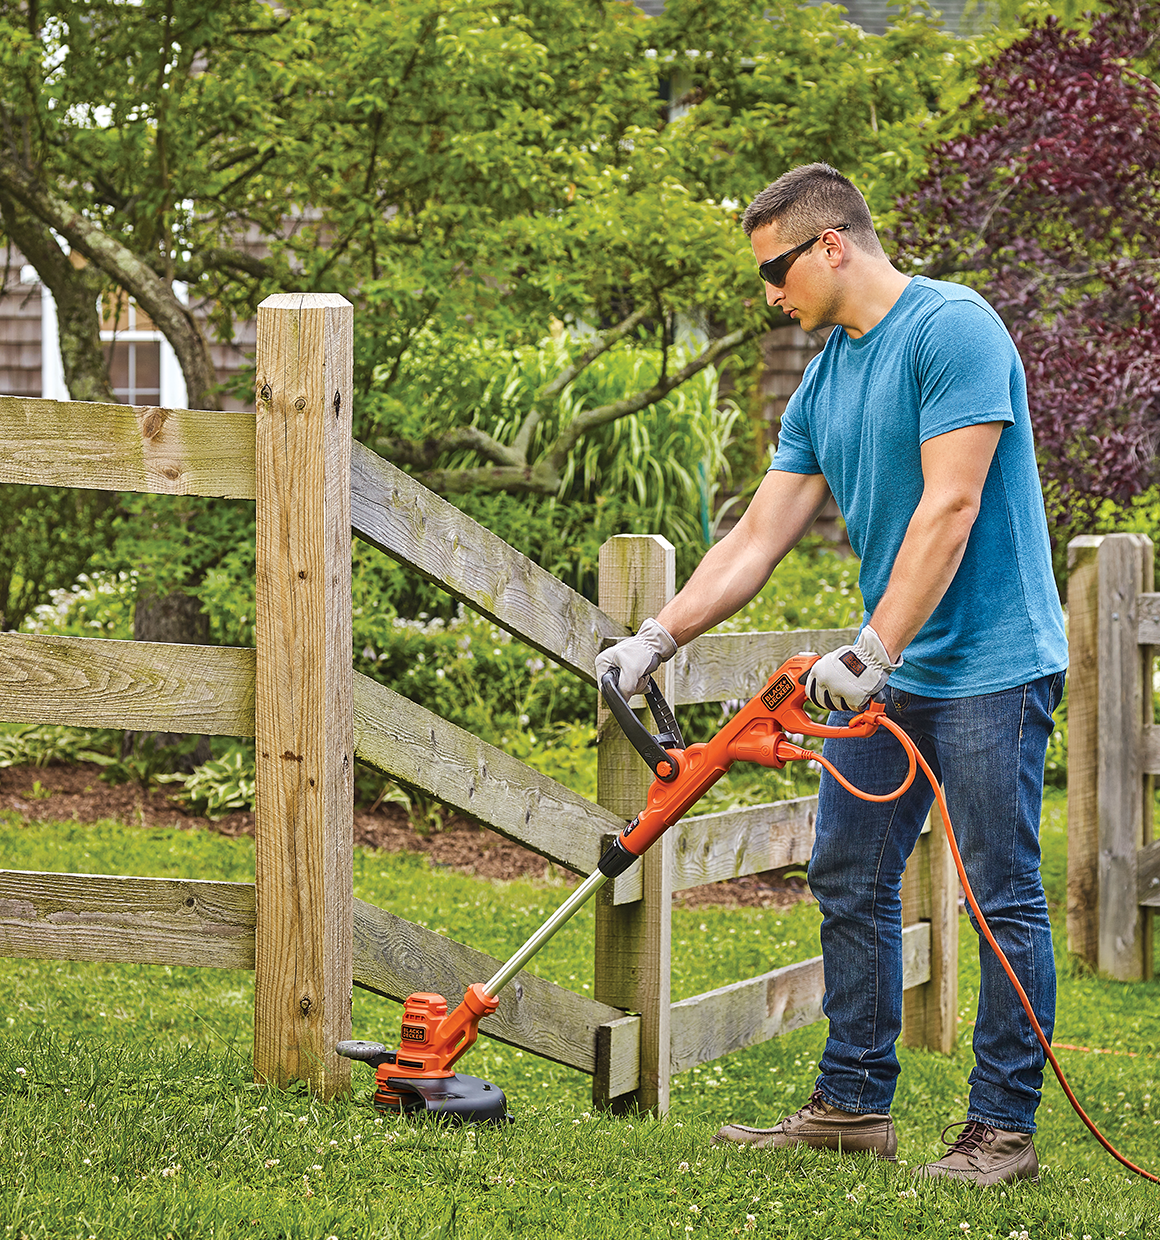 BLACK & DECKER 7.2-Amp Corded Electric String Trimmer and Edger in the  Corded Electric String Trimmers department at